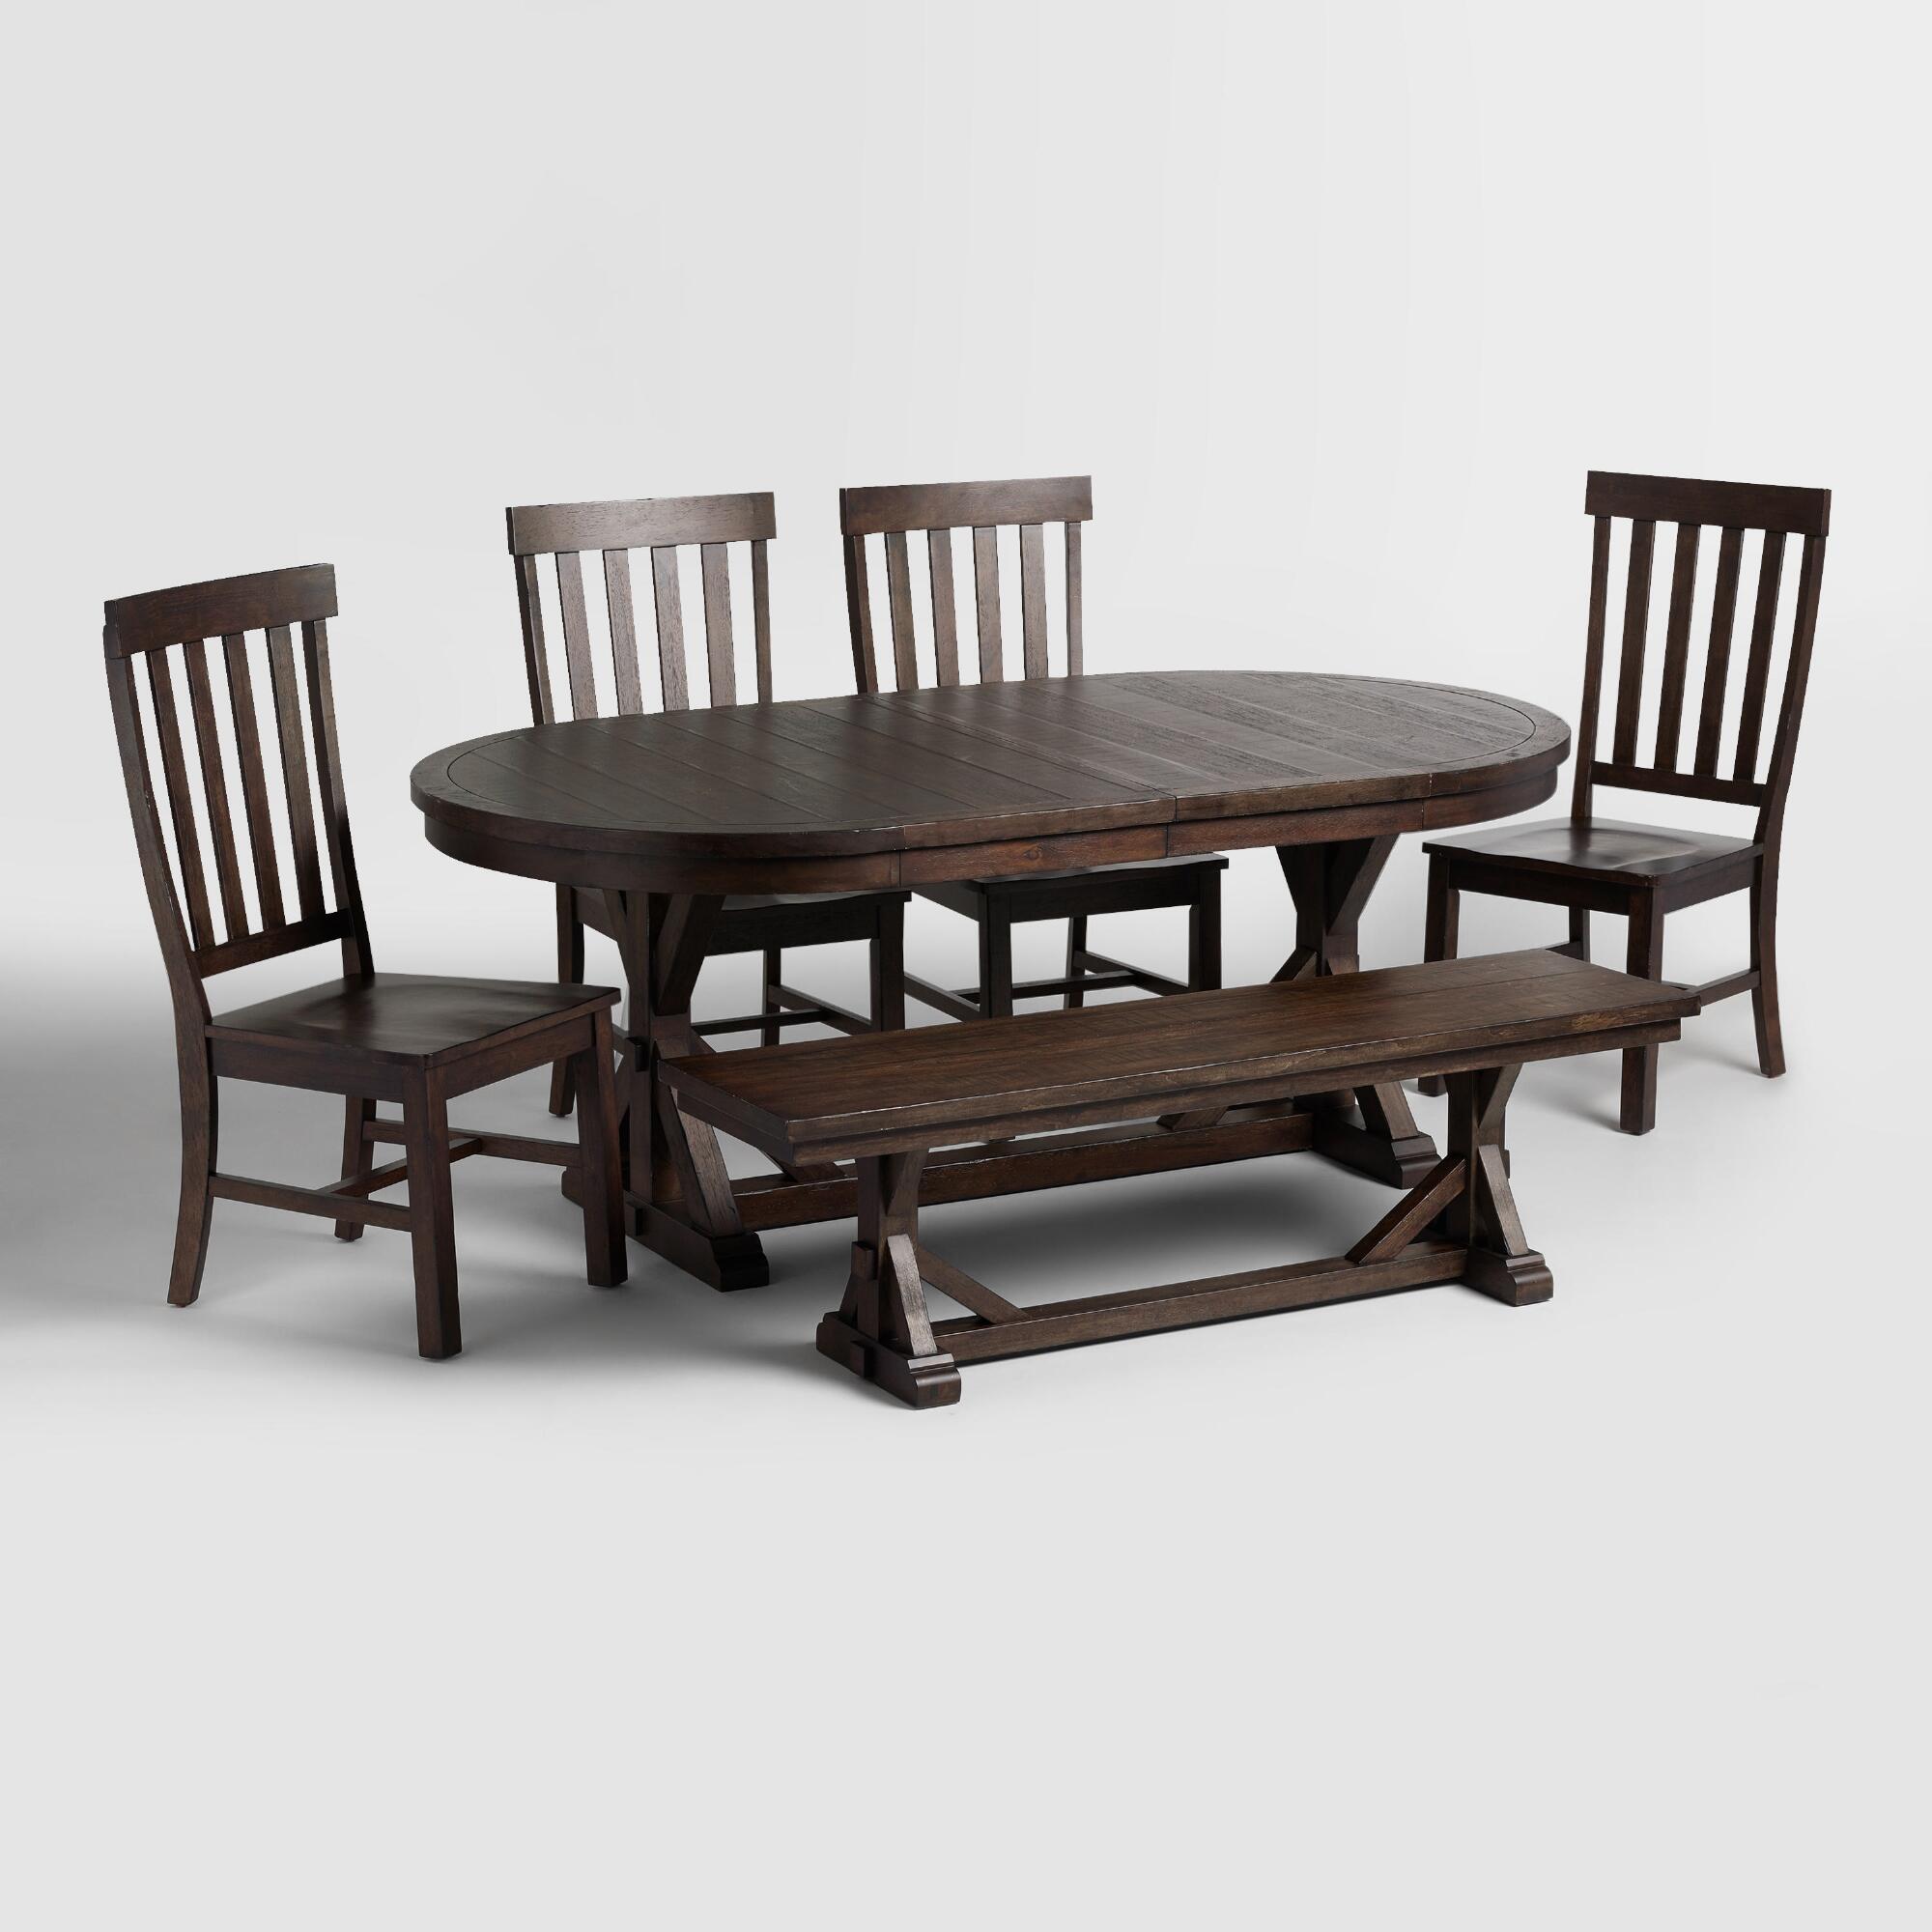 Dining Room Furniture Sets, Table & Chairs | World Market